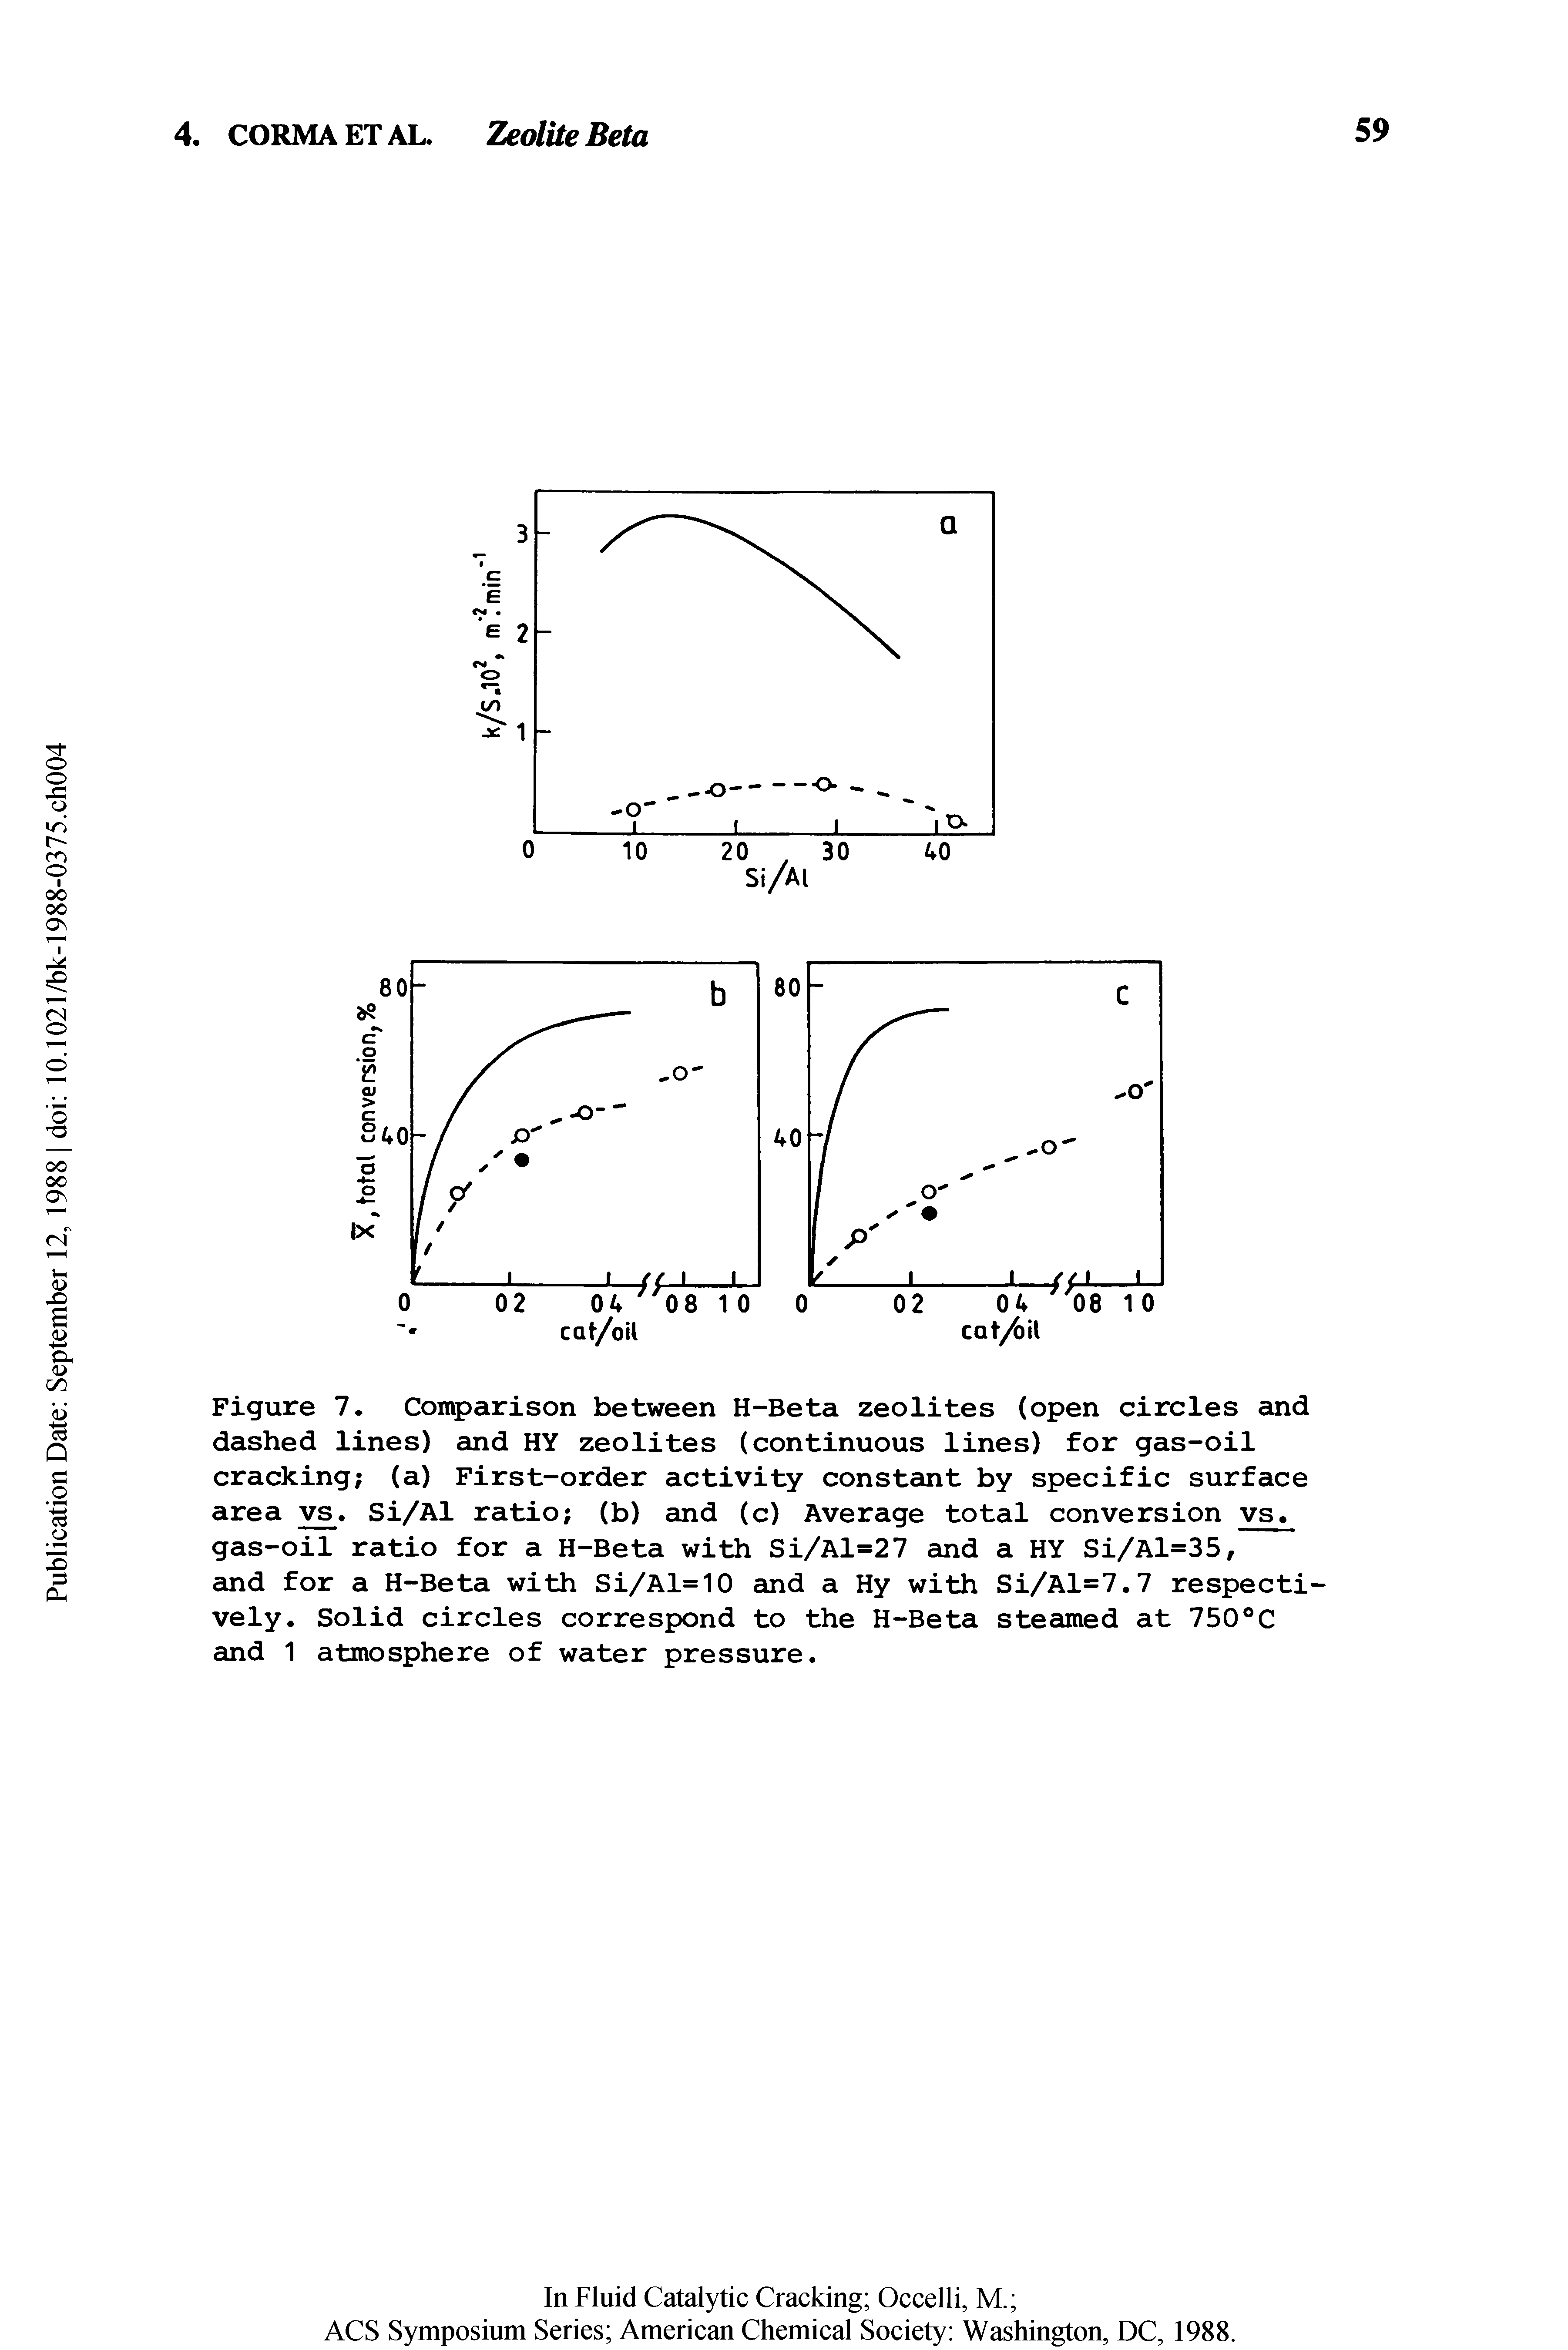 Figure 7. Comparison between H-Beta zeolites (open circles and dashed lines) and HY zeolites (continuous lines) for gas-oil cracking (a) First-order activity constant by specific surface area vs, Si/Al ratio (b) and (c) Average total conversion vs. gas-oil ratio for a H-Beta with Si/Al=27 and a HY Si/Al=35, and for a H-Beta with Si/Al=10 and a Hy with Si/Al=7.7 respectively. Solid circles correspond to the H-Beta steamed at 750 C and 1 atmosphere of water pressure.